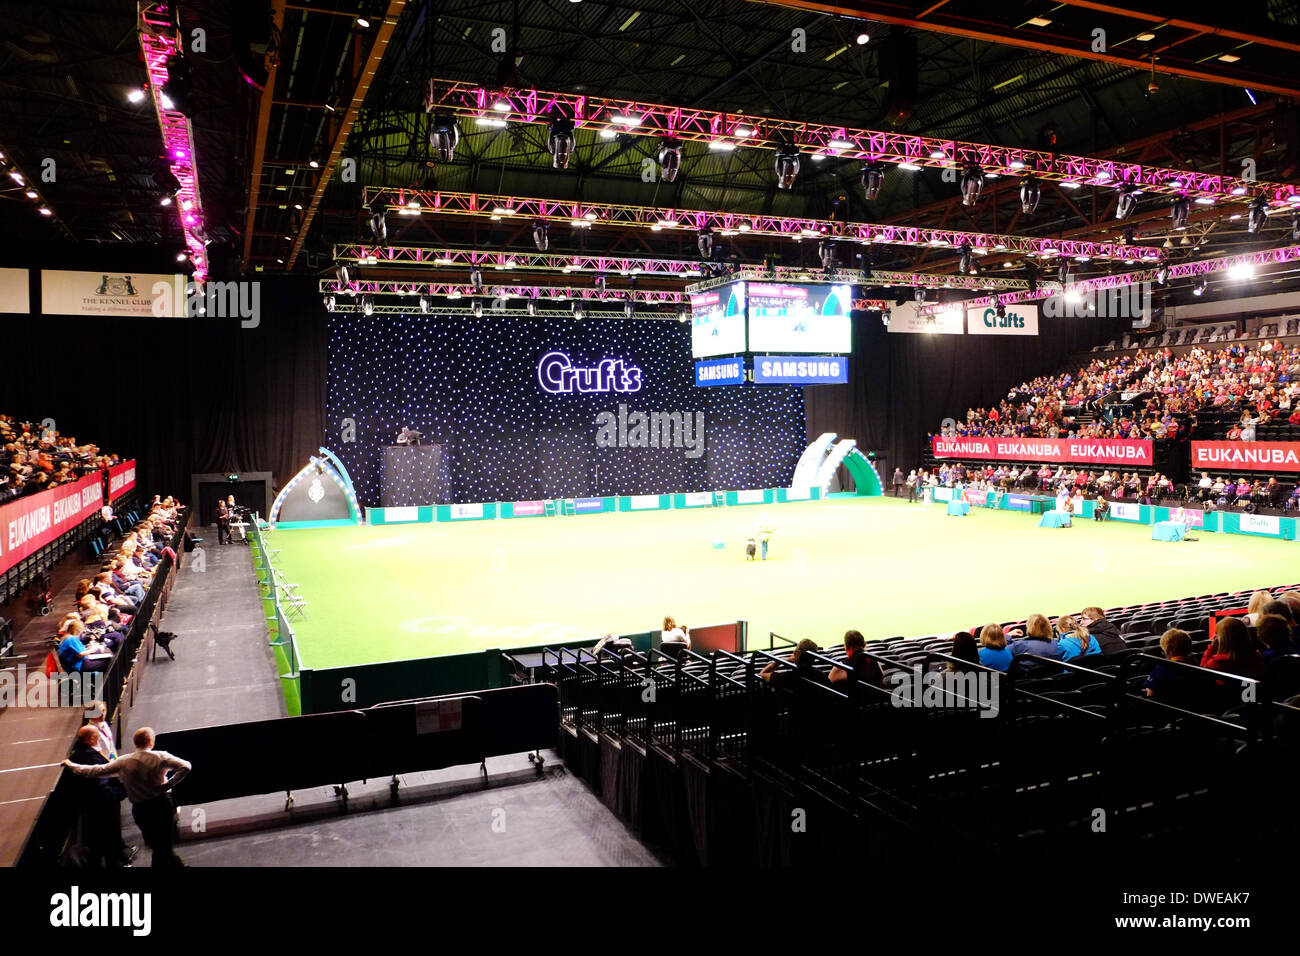 Dog Show Arena High Resolution Stock Photography and Images - Alamy